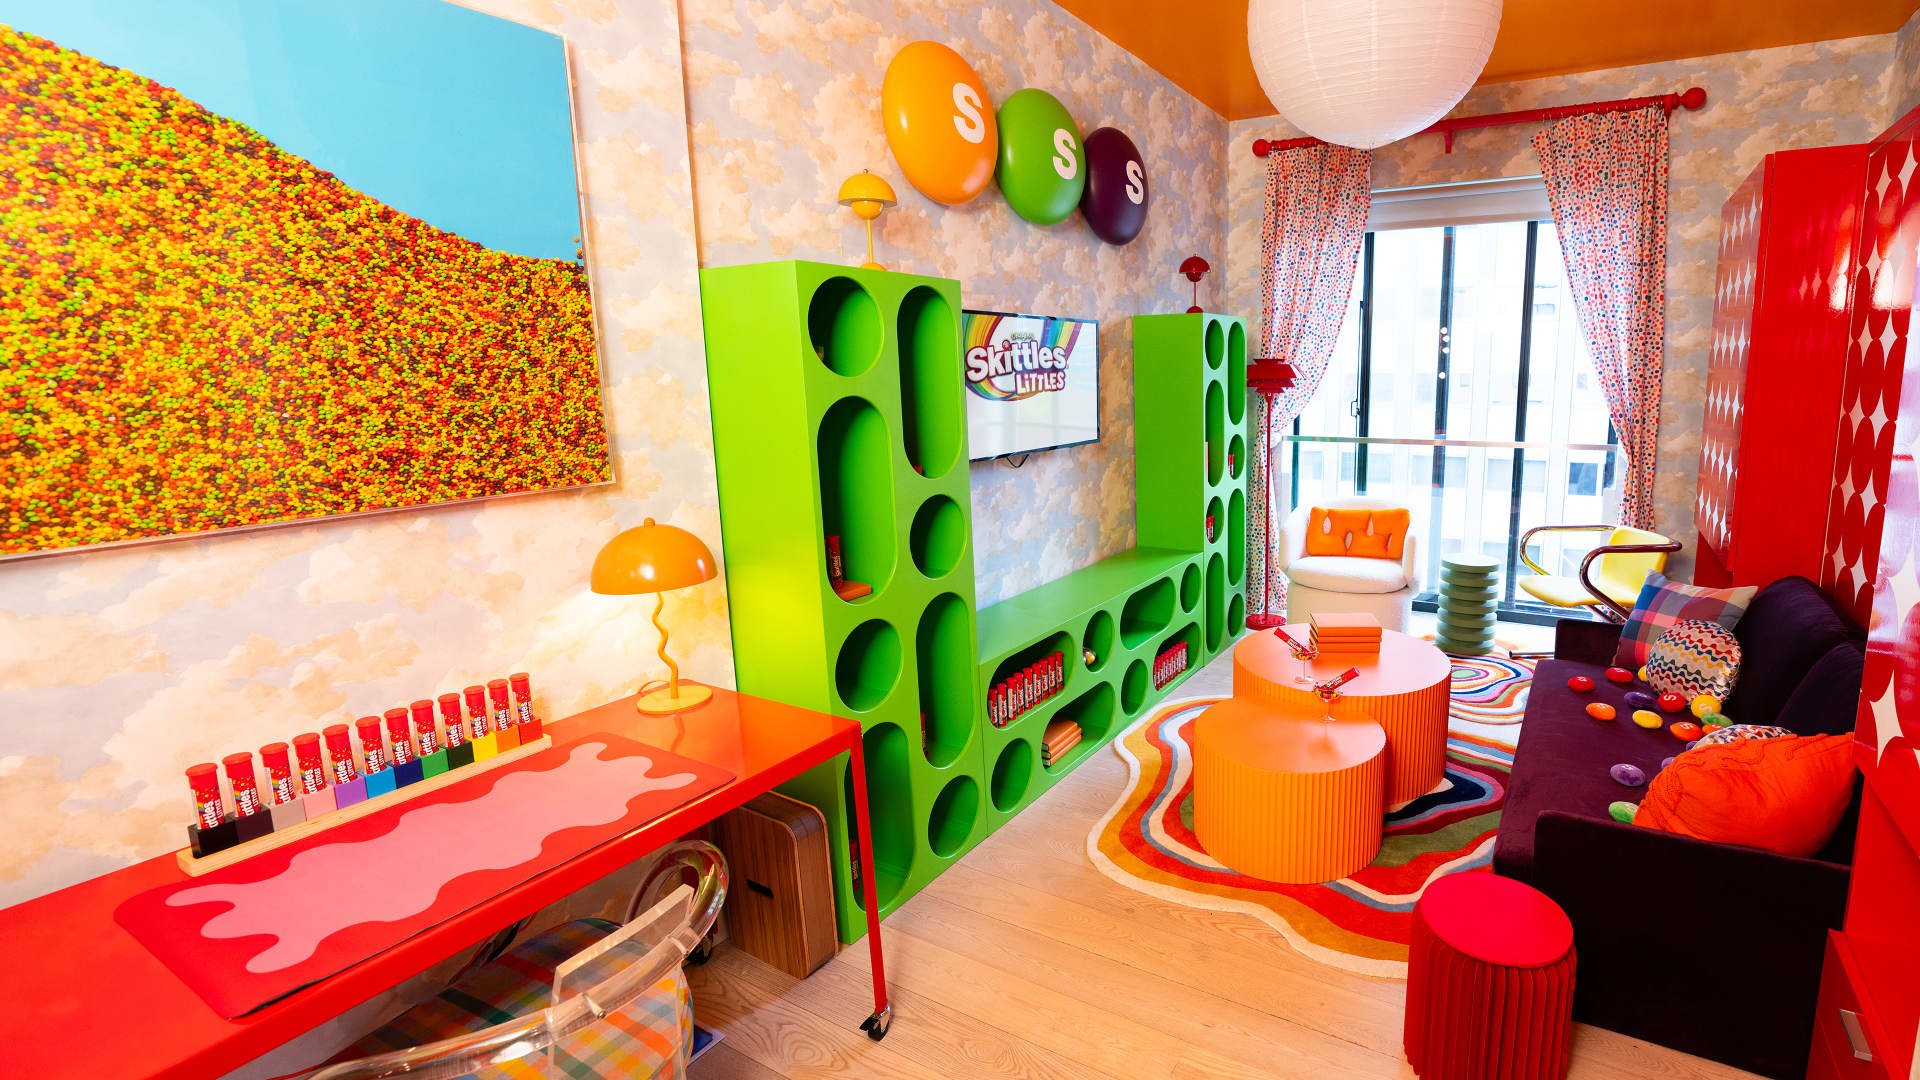 Skittles is giving away a 1-year stay in an NYC micro-apartment that usually rents for $3,500/month: Take a look inside